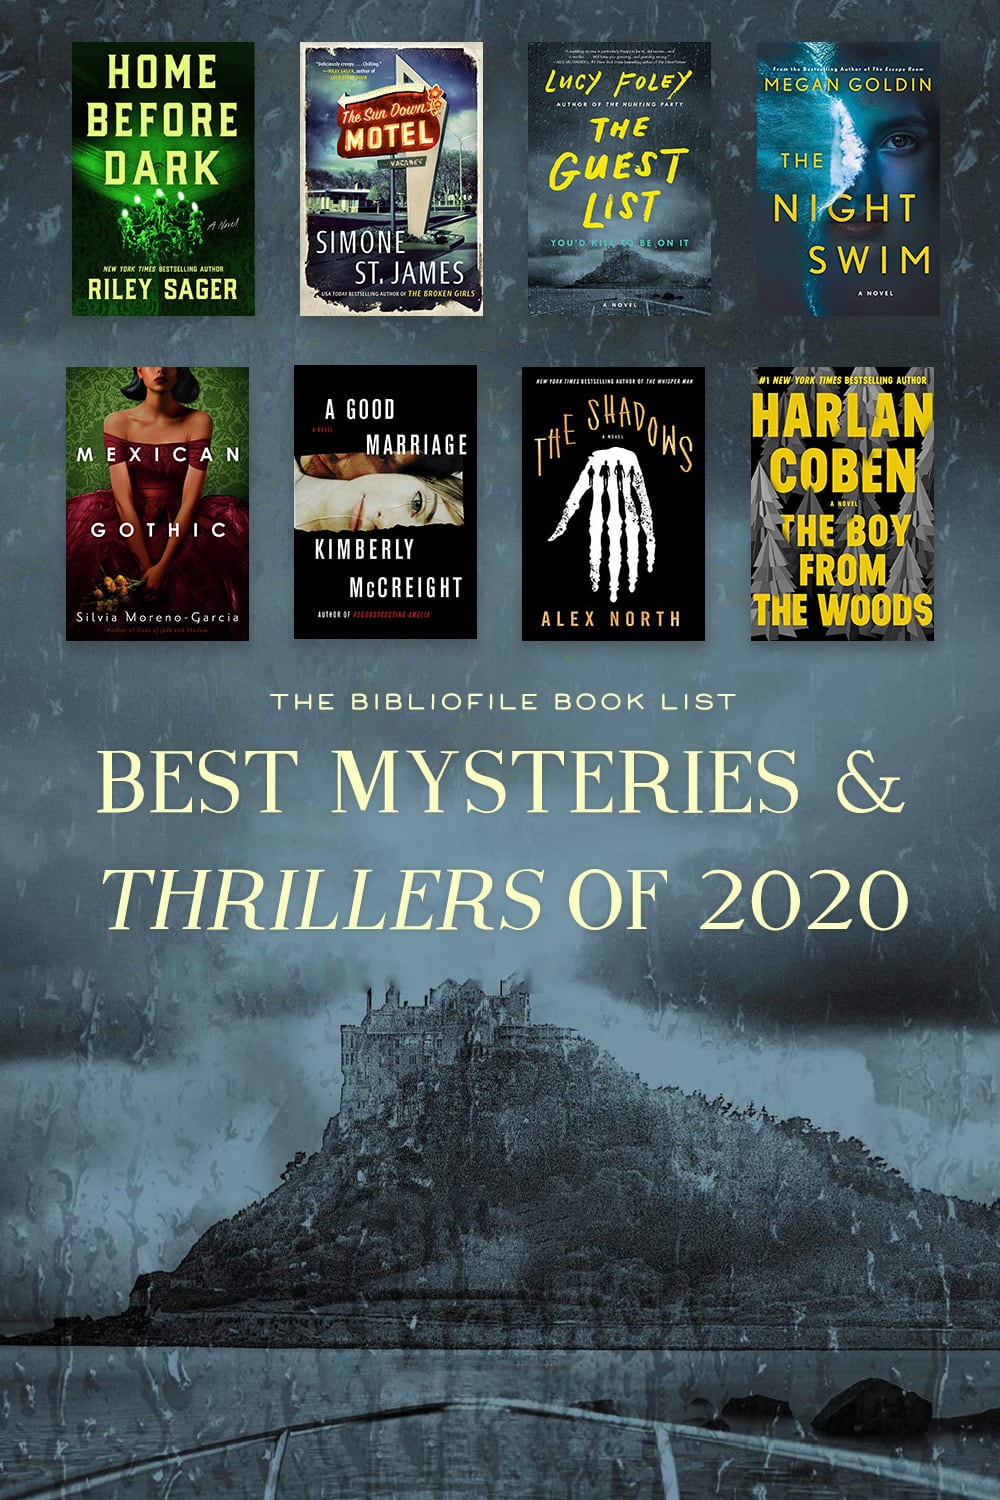 20 Best Mystery Novels & Thrillers of 2020 The Bibliofile